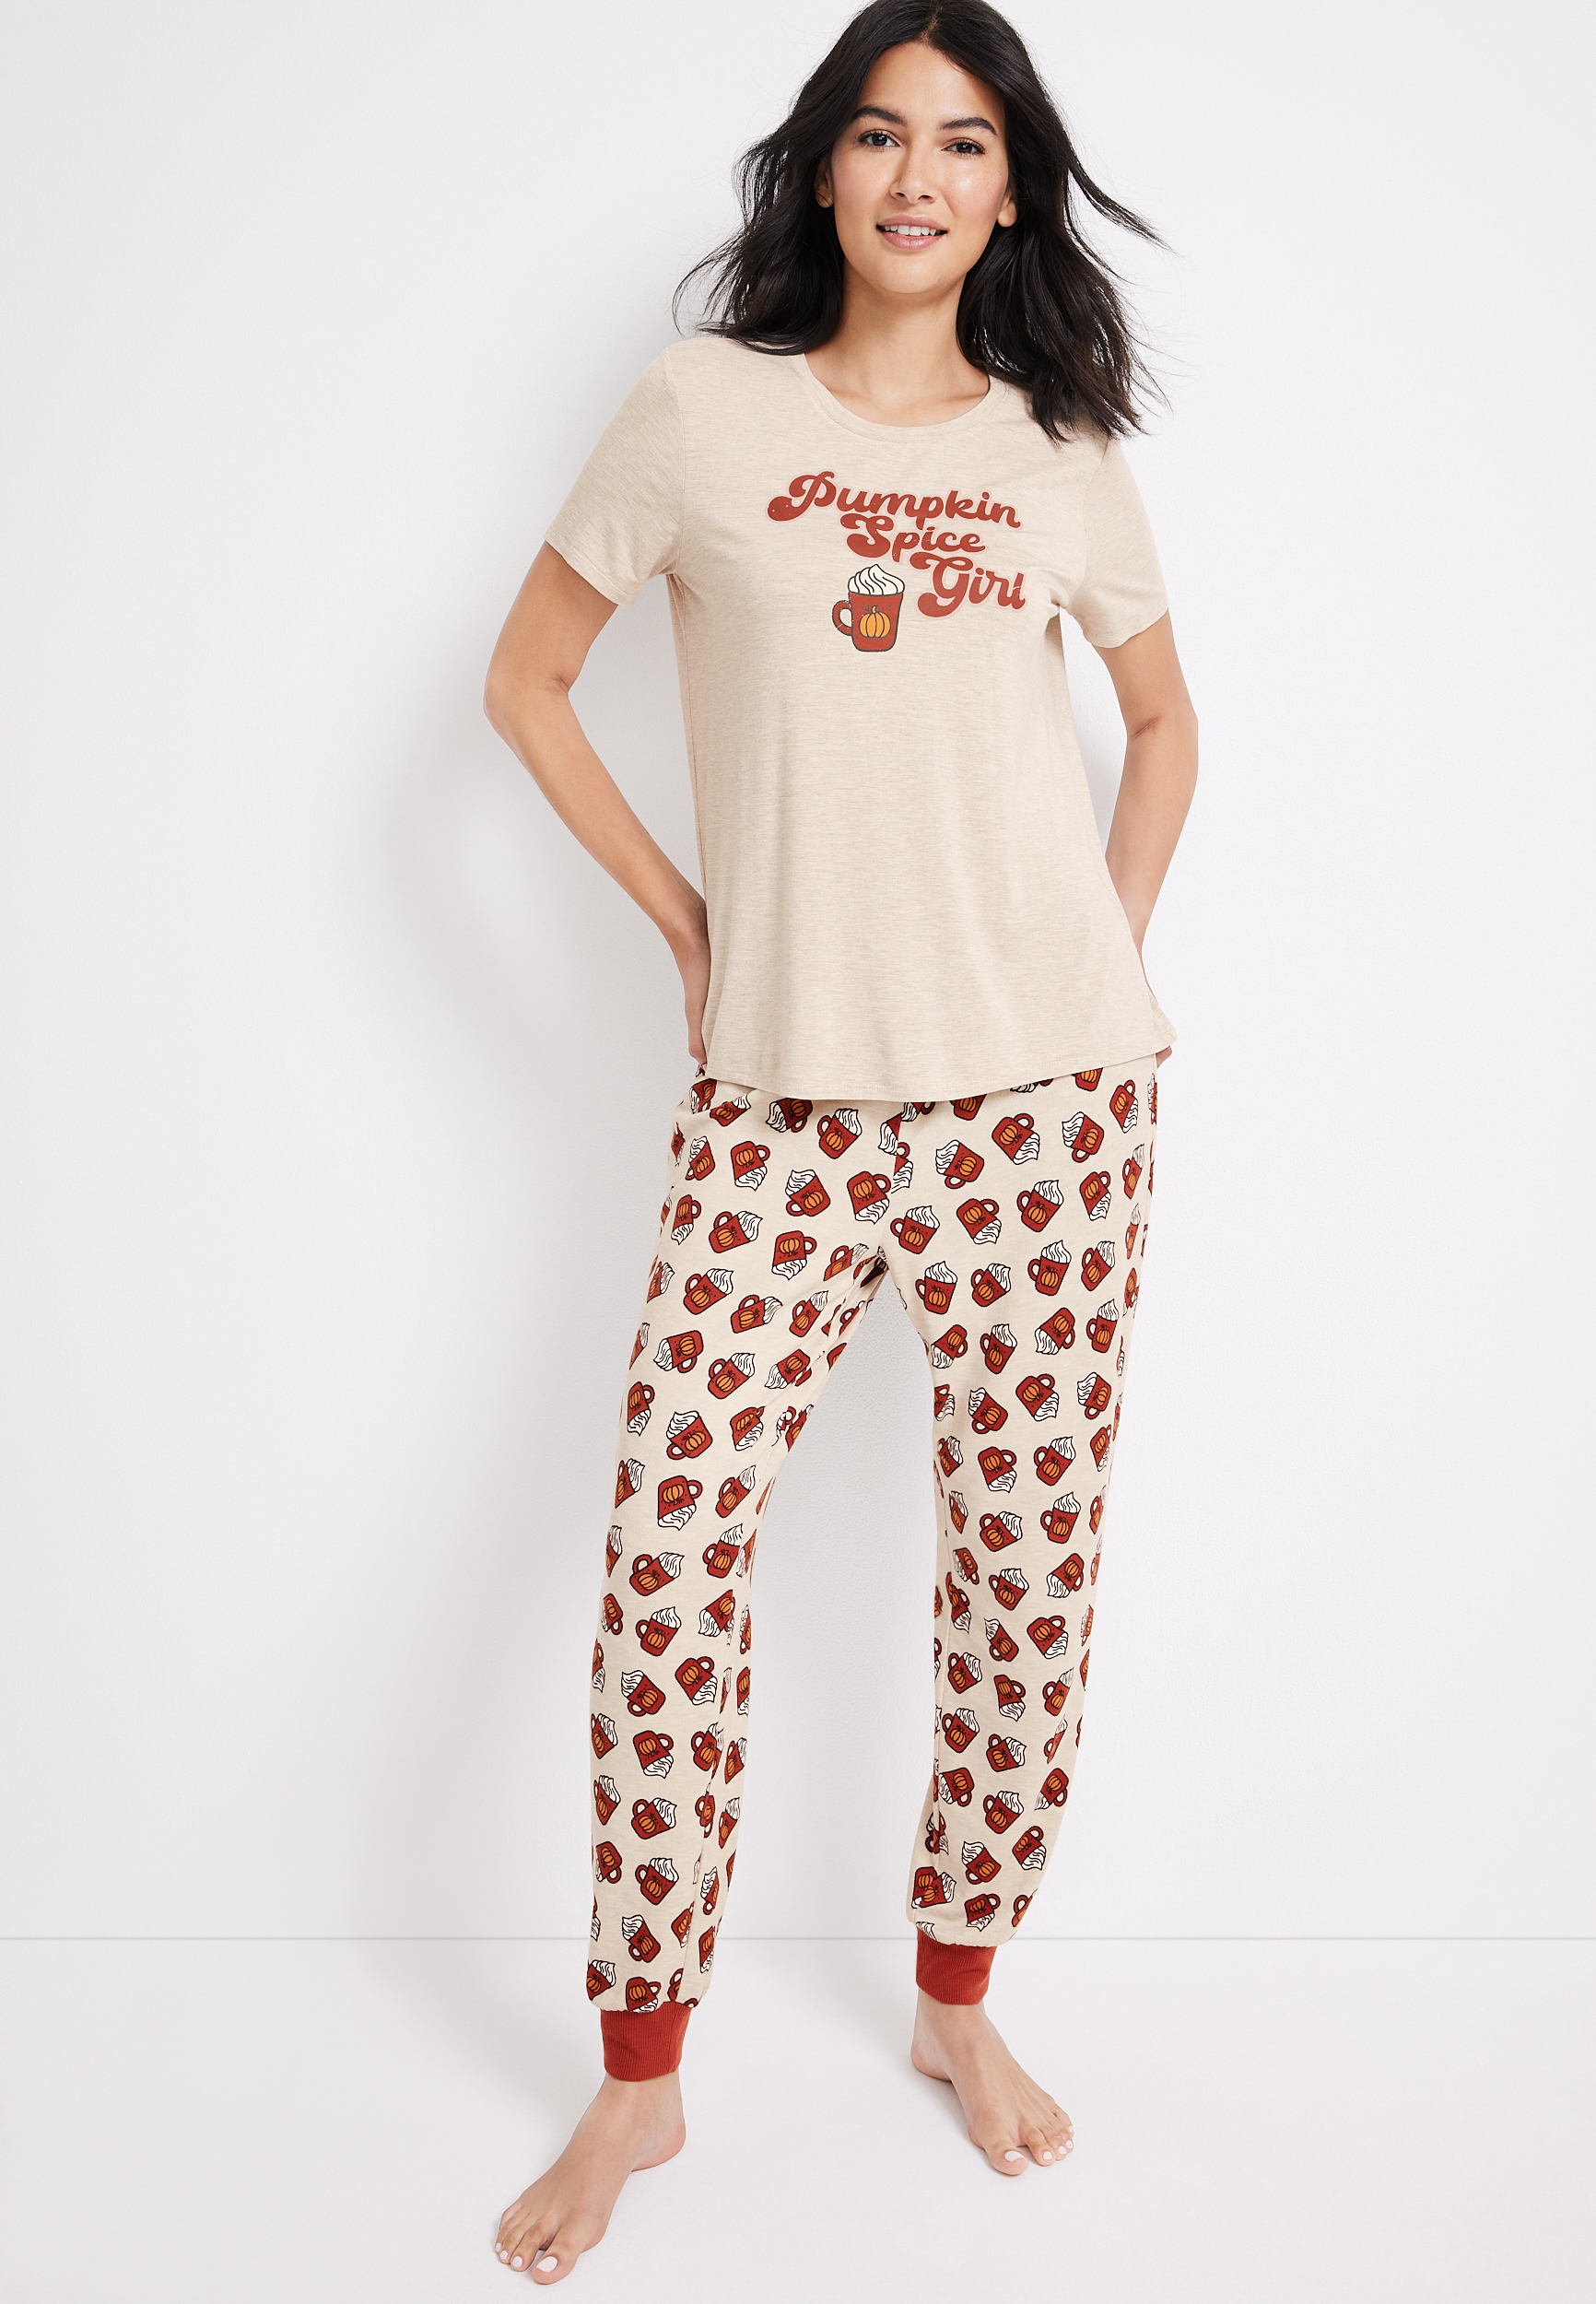 Pumpkin Spice Girl Graphic Tee And Jogger Pajama Set | maurices